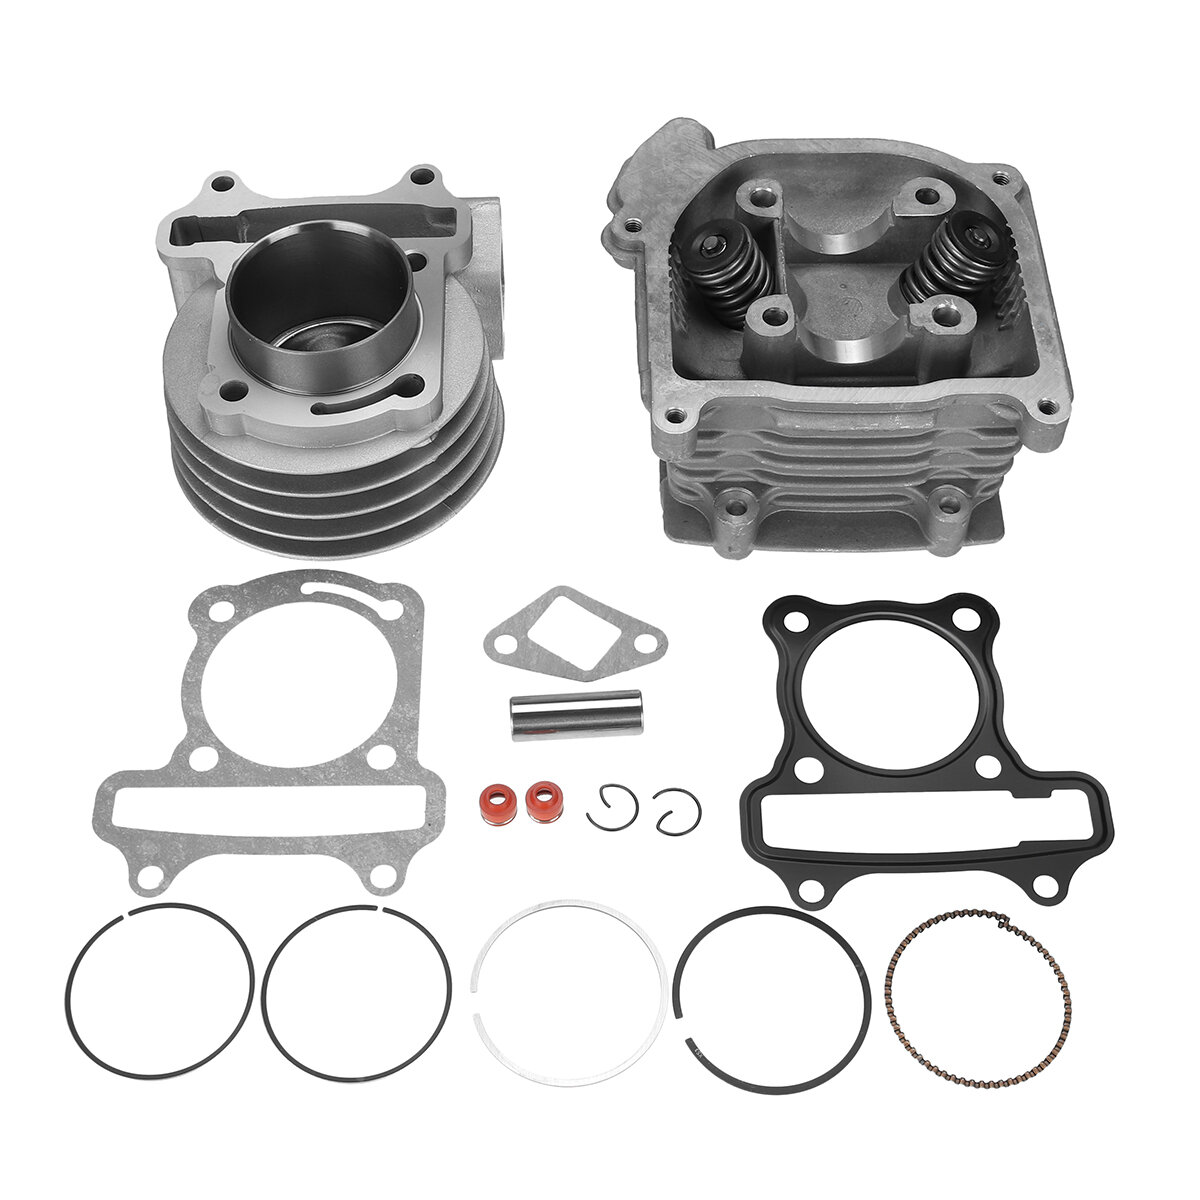 69mm Big Bore Cylinder Head Rebuild Kit For 139QMB GY6 50cc 60cc 100cc Scooter